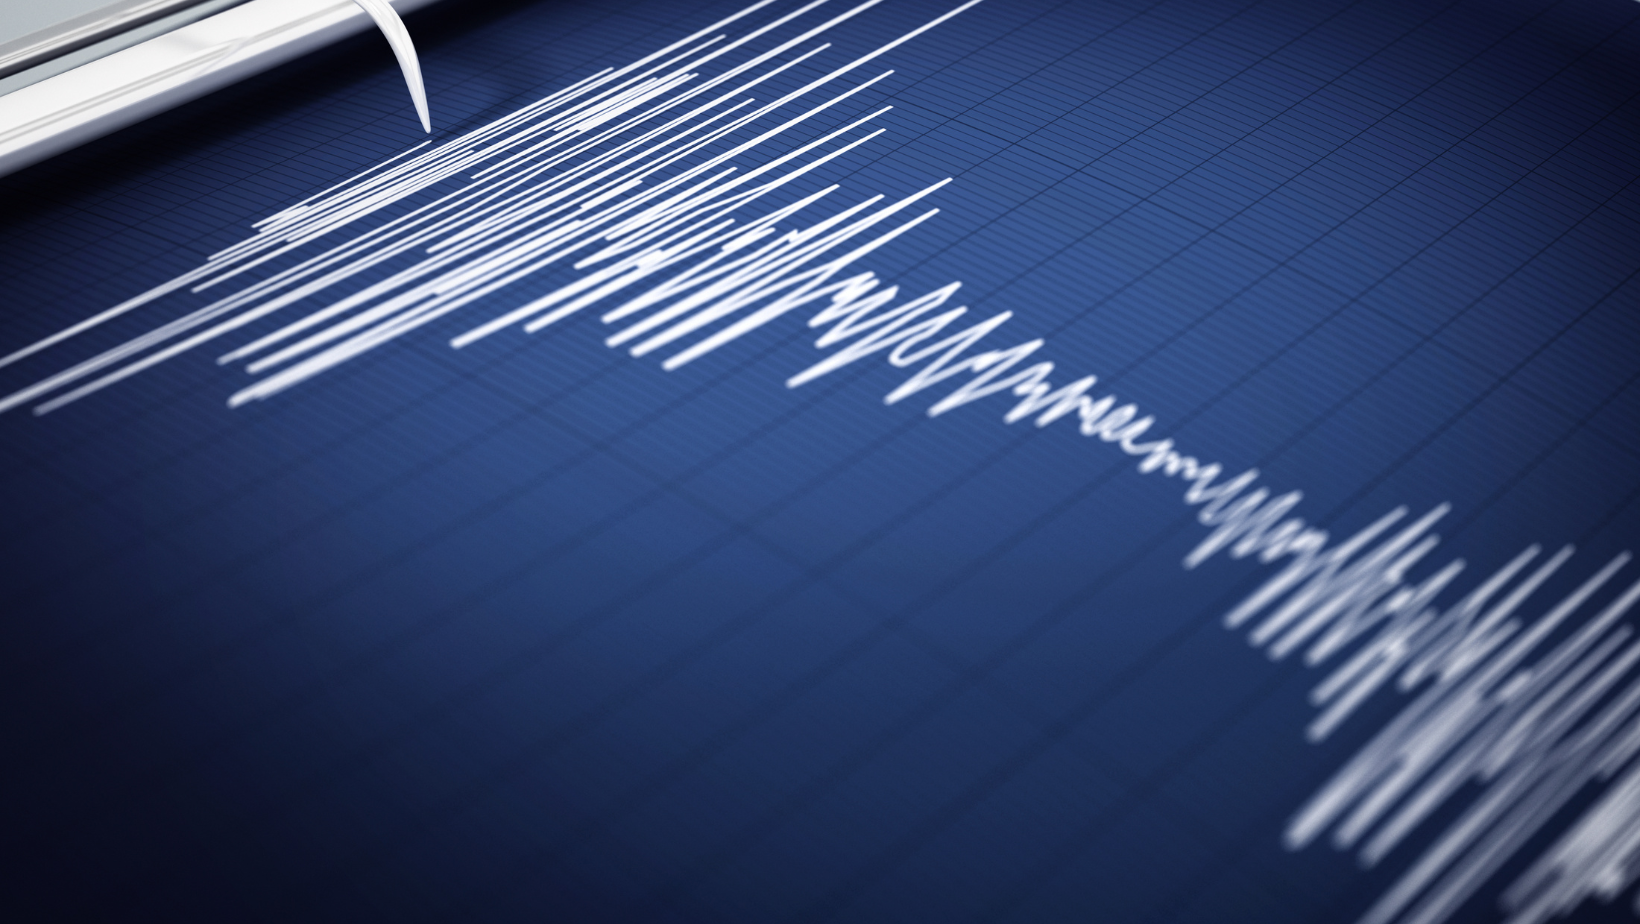 Factors affecting earthquake insurance costs